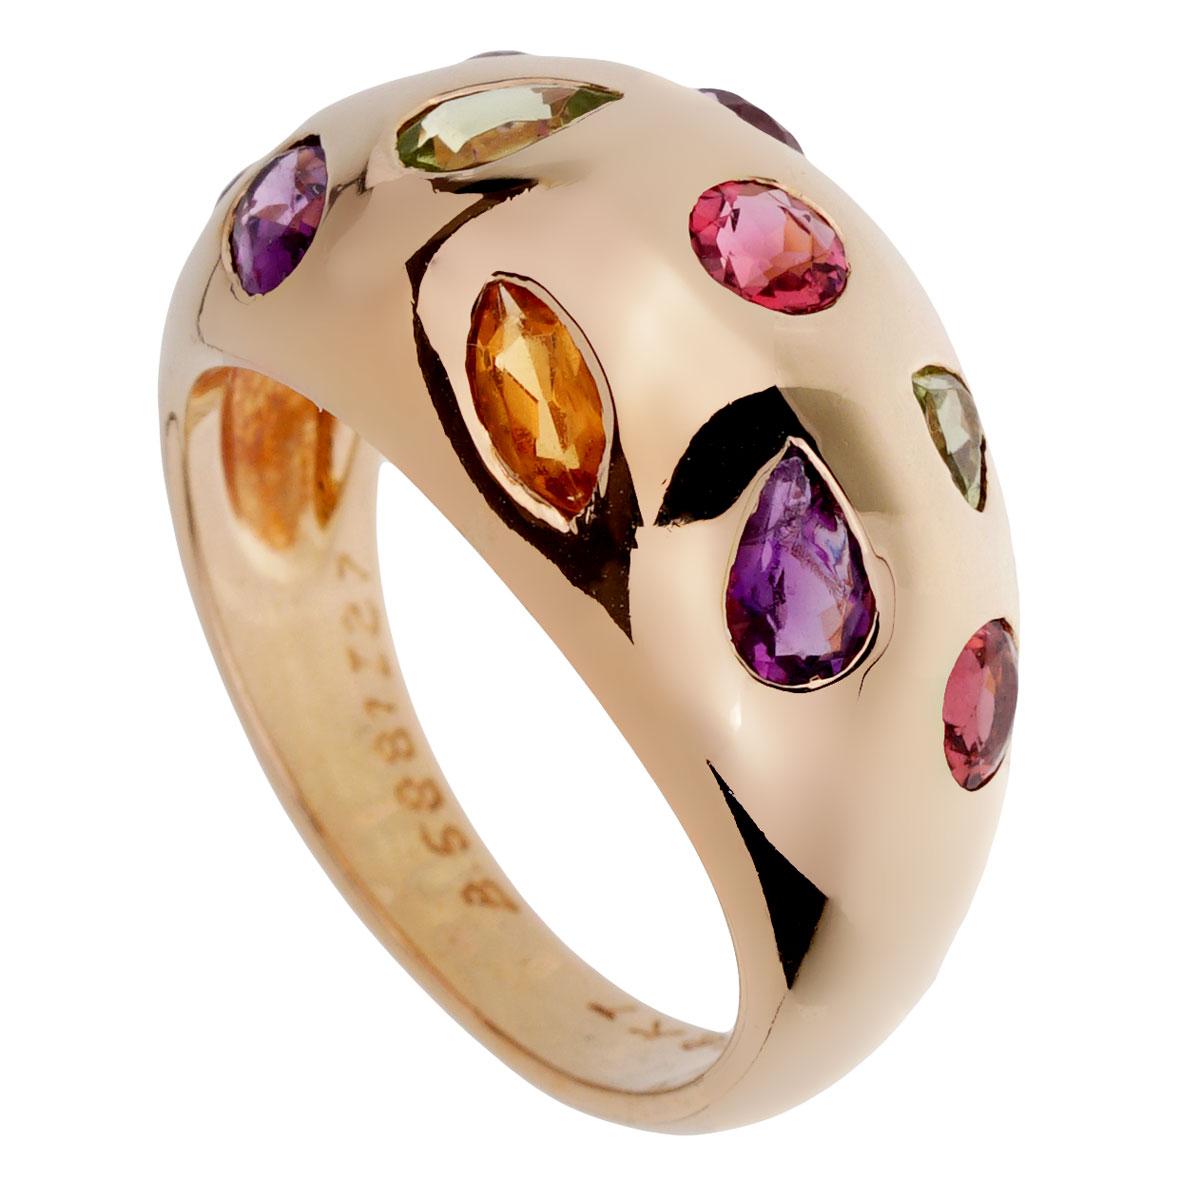 A chic Van Cleef & Arpels ring showcasing multiple gemstones and various shapes in 18k yellow gold. 